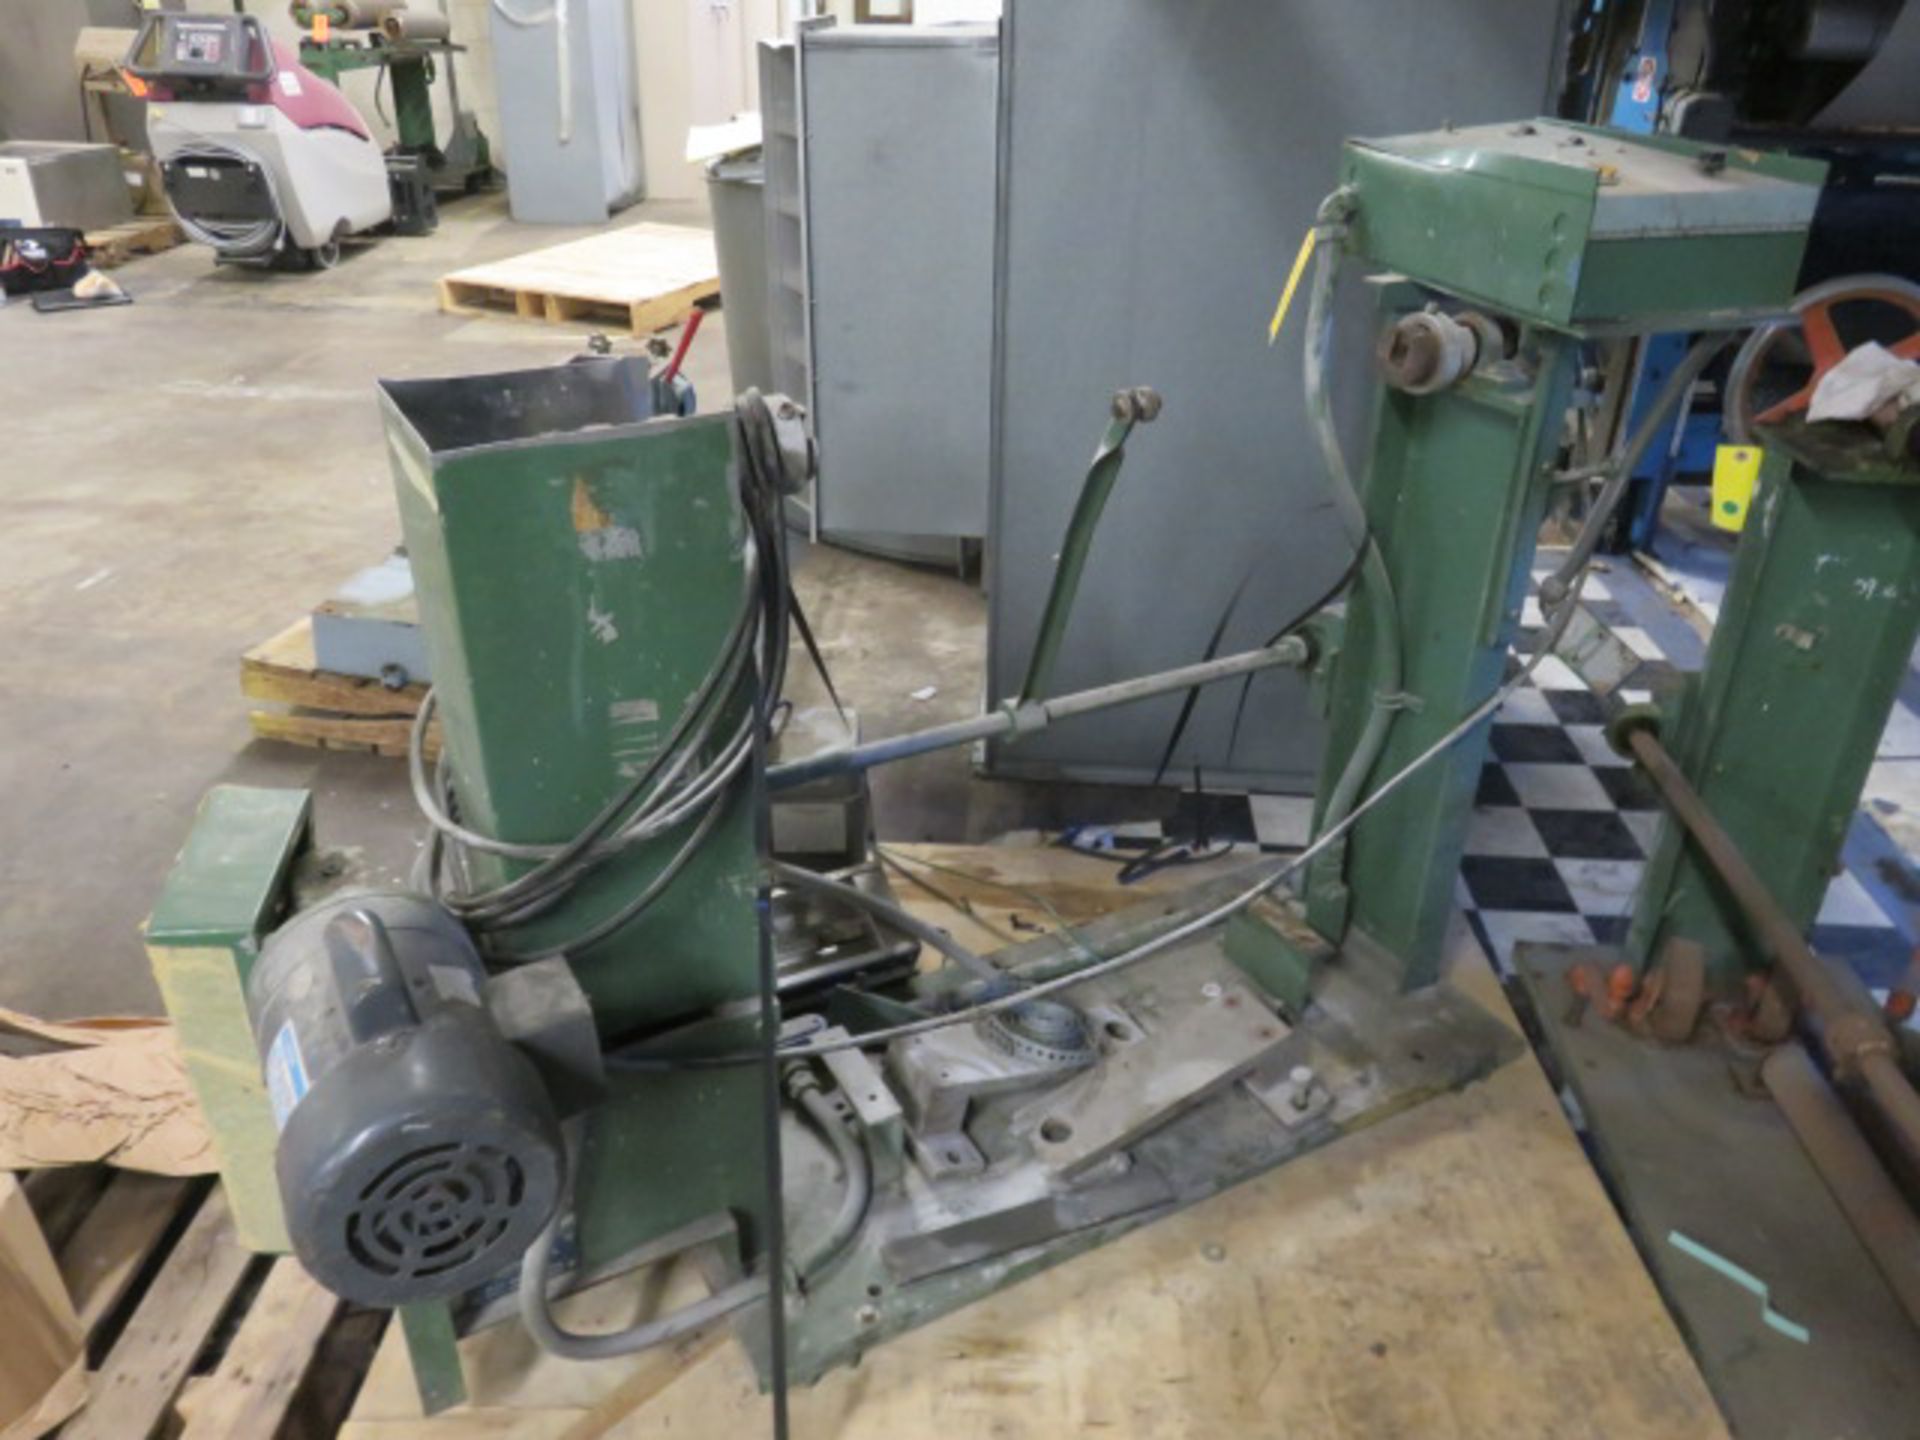 MFG. UNKNOWN SINGLE POSITION WINDER WITH APPROX. 20"W X 30 "DIA. CAPACITY, S/N: N/A [RIGGING FEES